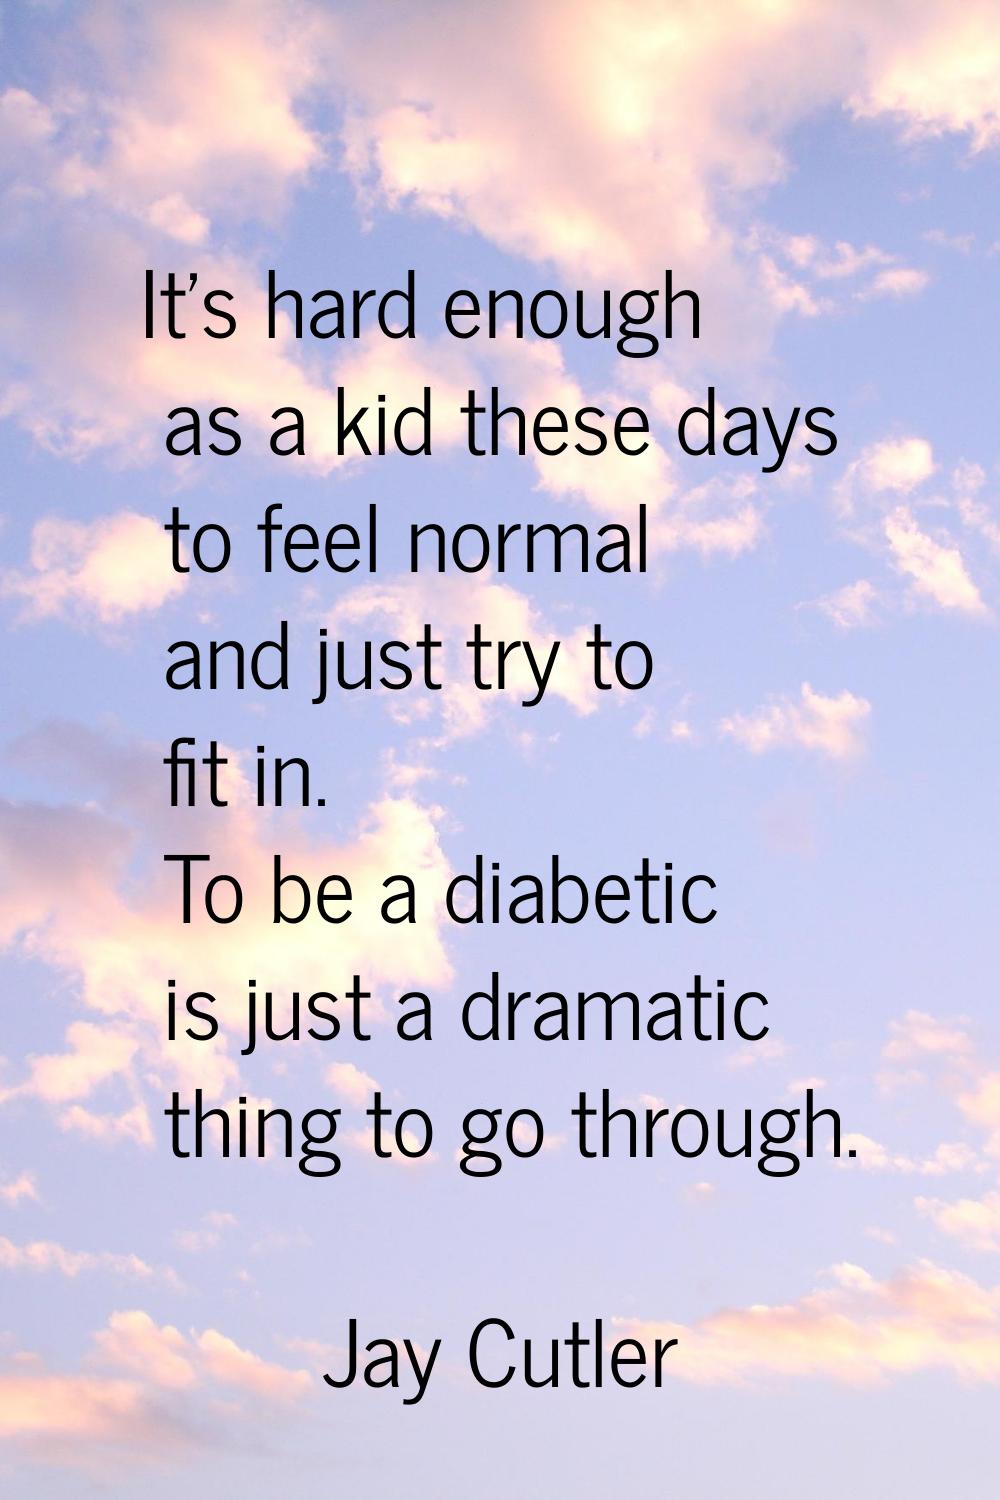 It's hard enough as a kid these days to feel normal and just try to fit in. To be a diabetic is jus